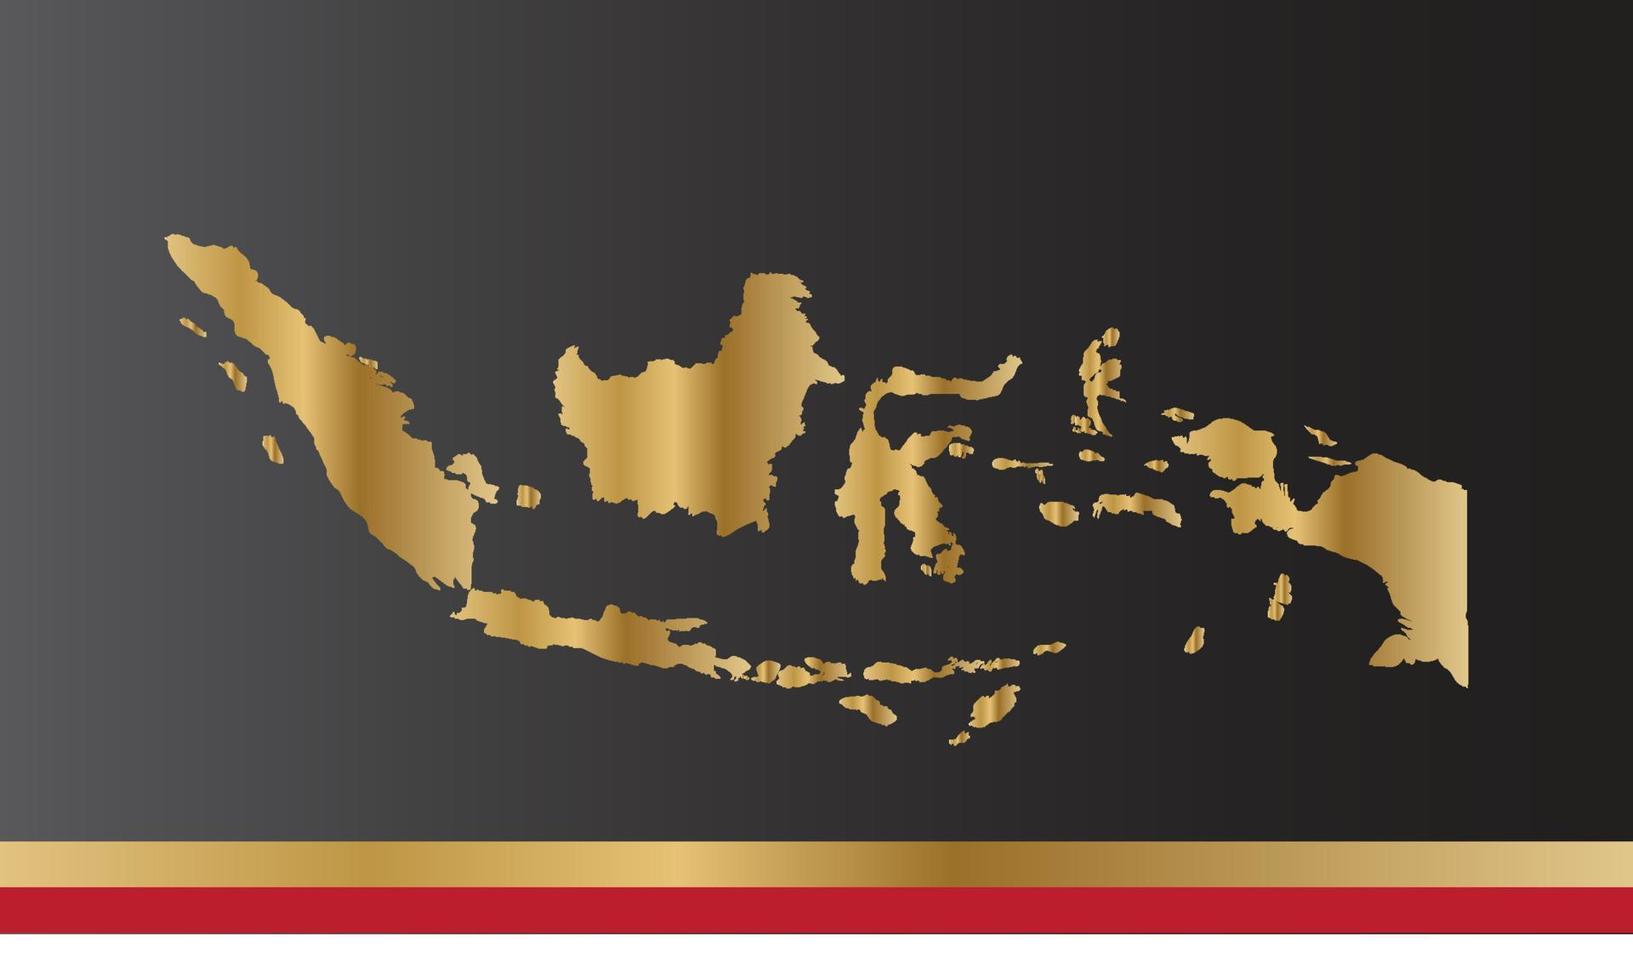 Gold map of Indonesia vector